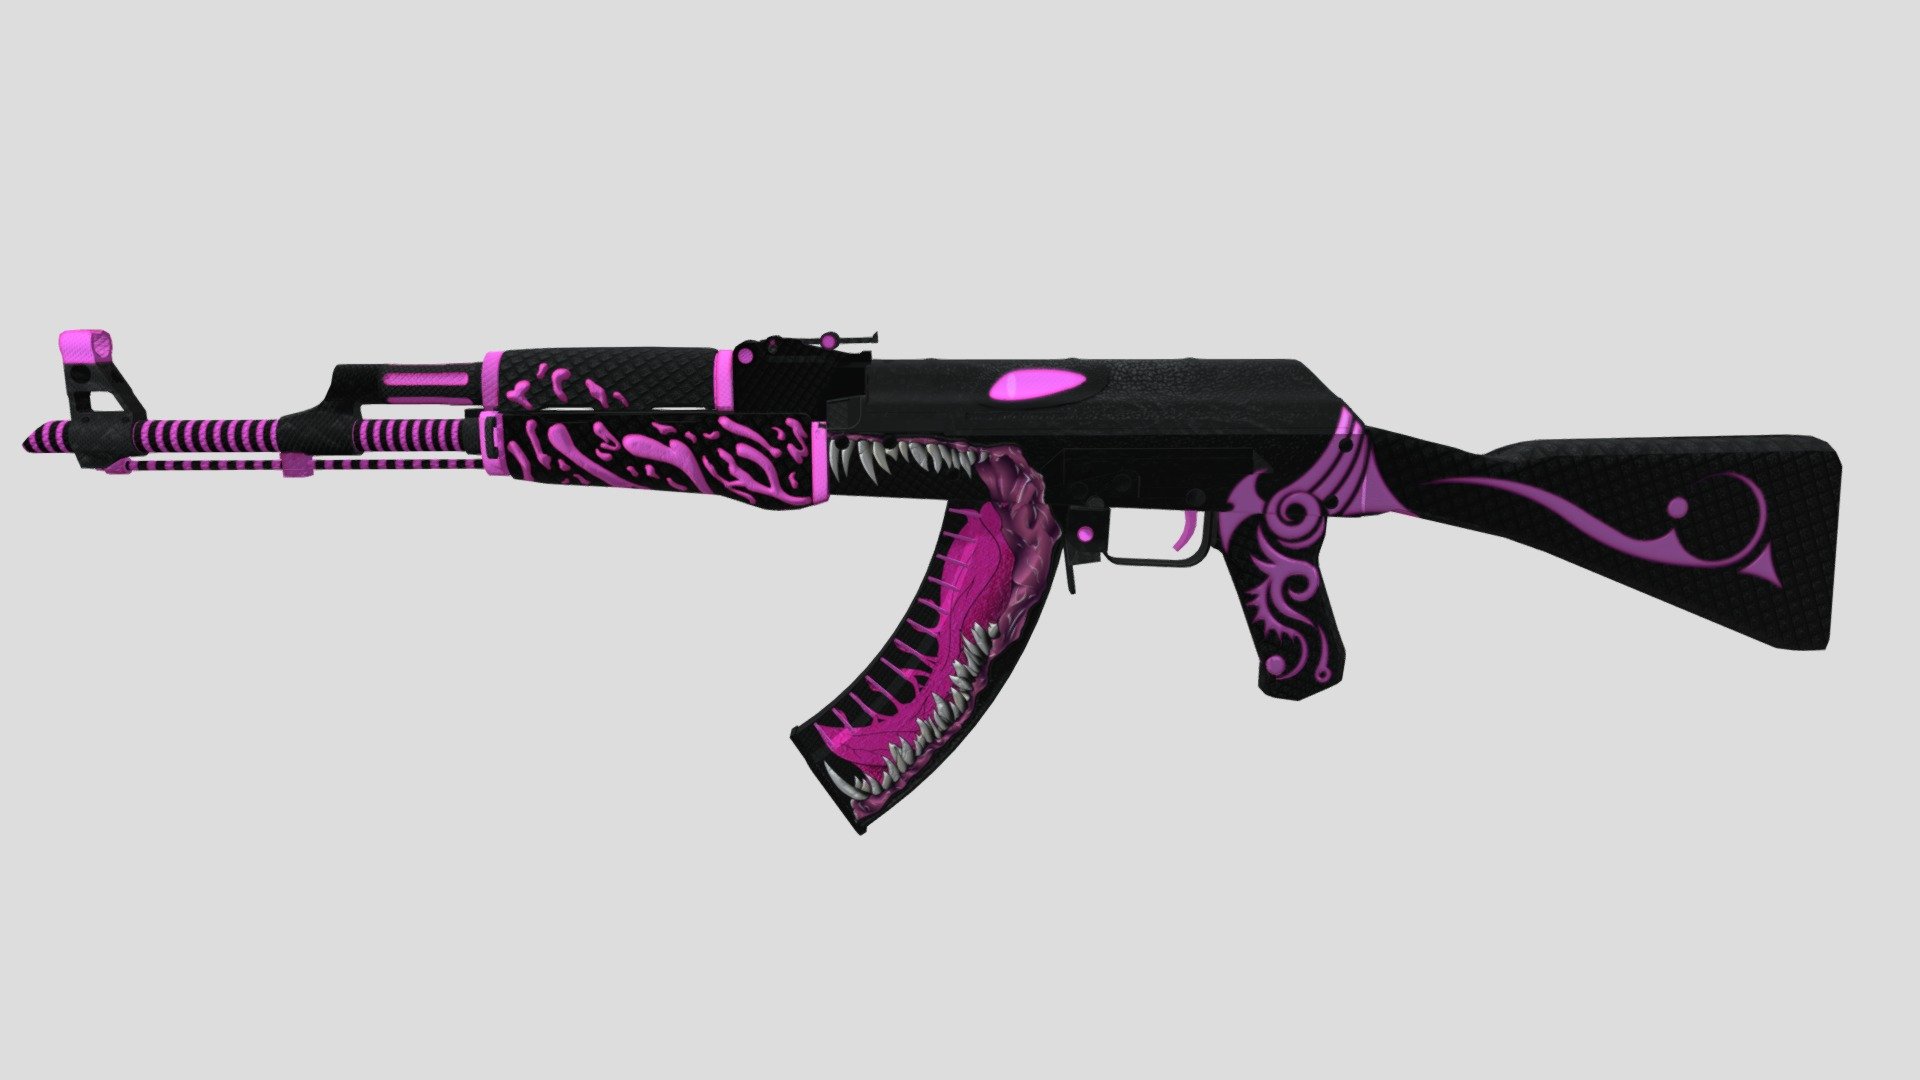 Powerful and Reliable, the AK-47 is one of the most popular Assault Rifles in the World. He is deadliest in short, controlled bursts. The Rifle Body has been custom painted Flaky Pink Black with an intimidating jaw with Sharp teeth.

Credits:
SIR.Colloseus, Skin Creator.
Tenerserker, Founder of the Project.

Work Tools: (3D Coat /Photoshop /Paint.Net /PhotoScape)

Valve's Standard 3D Model 3d model